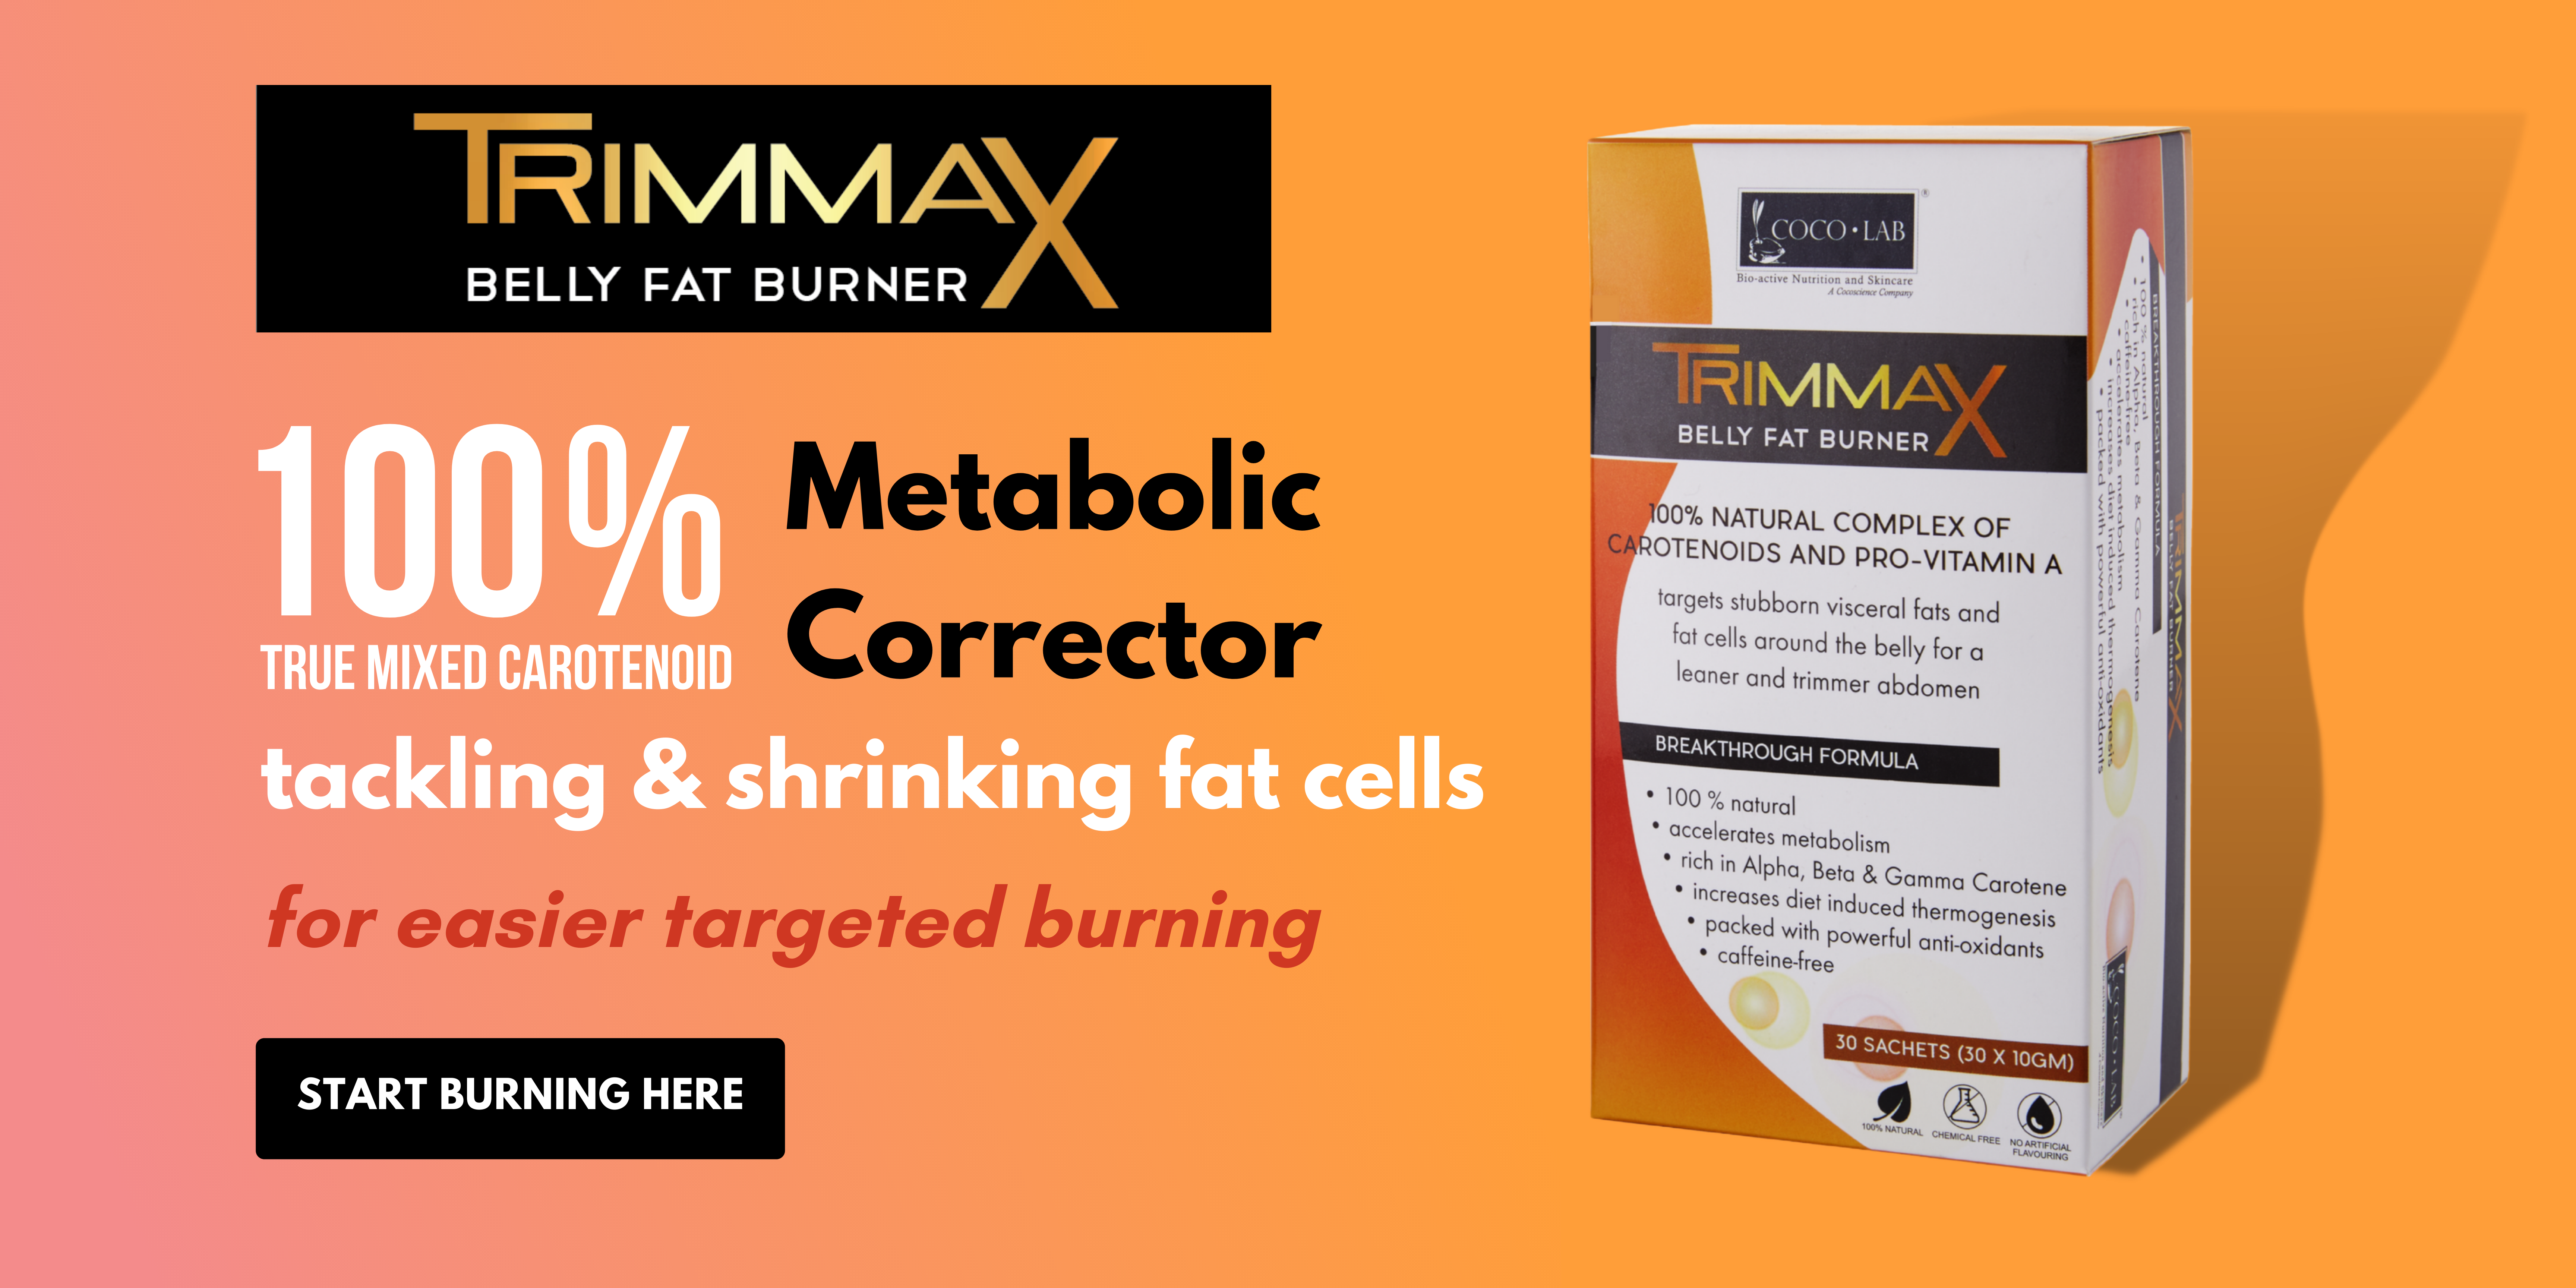 COCOLAB Trimmax Belly Fat Burner - for belly fat burning